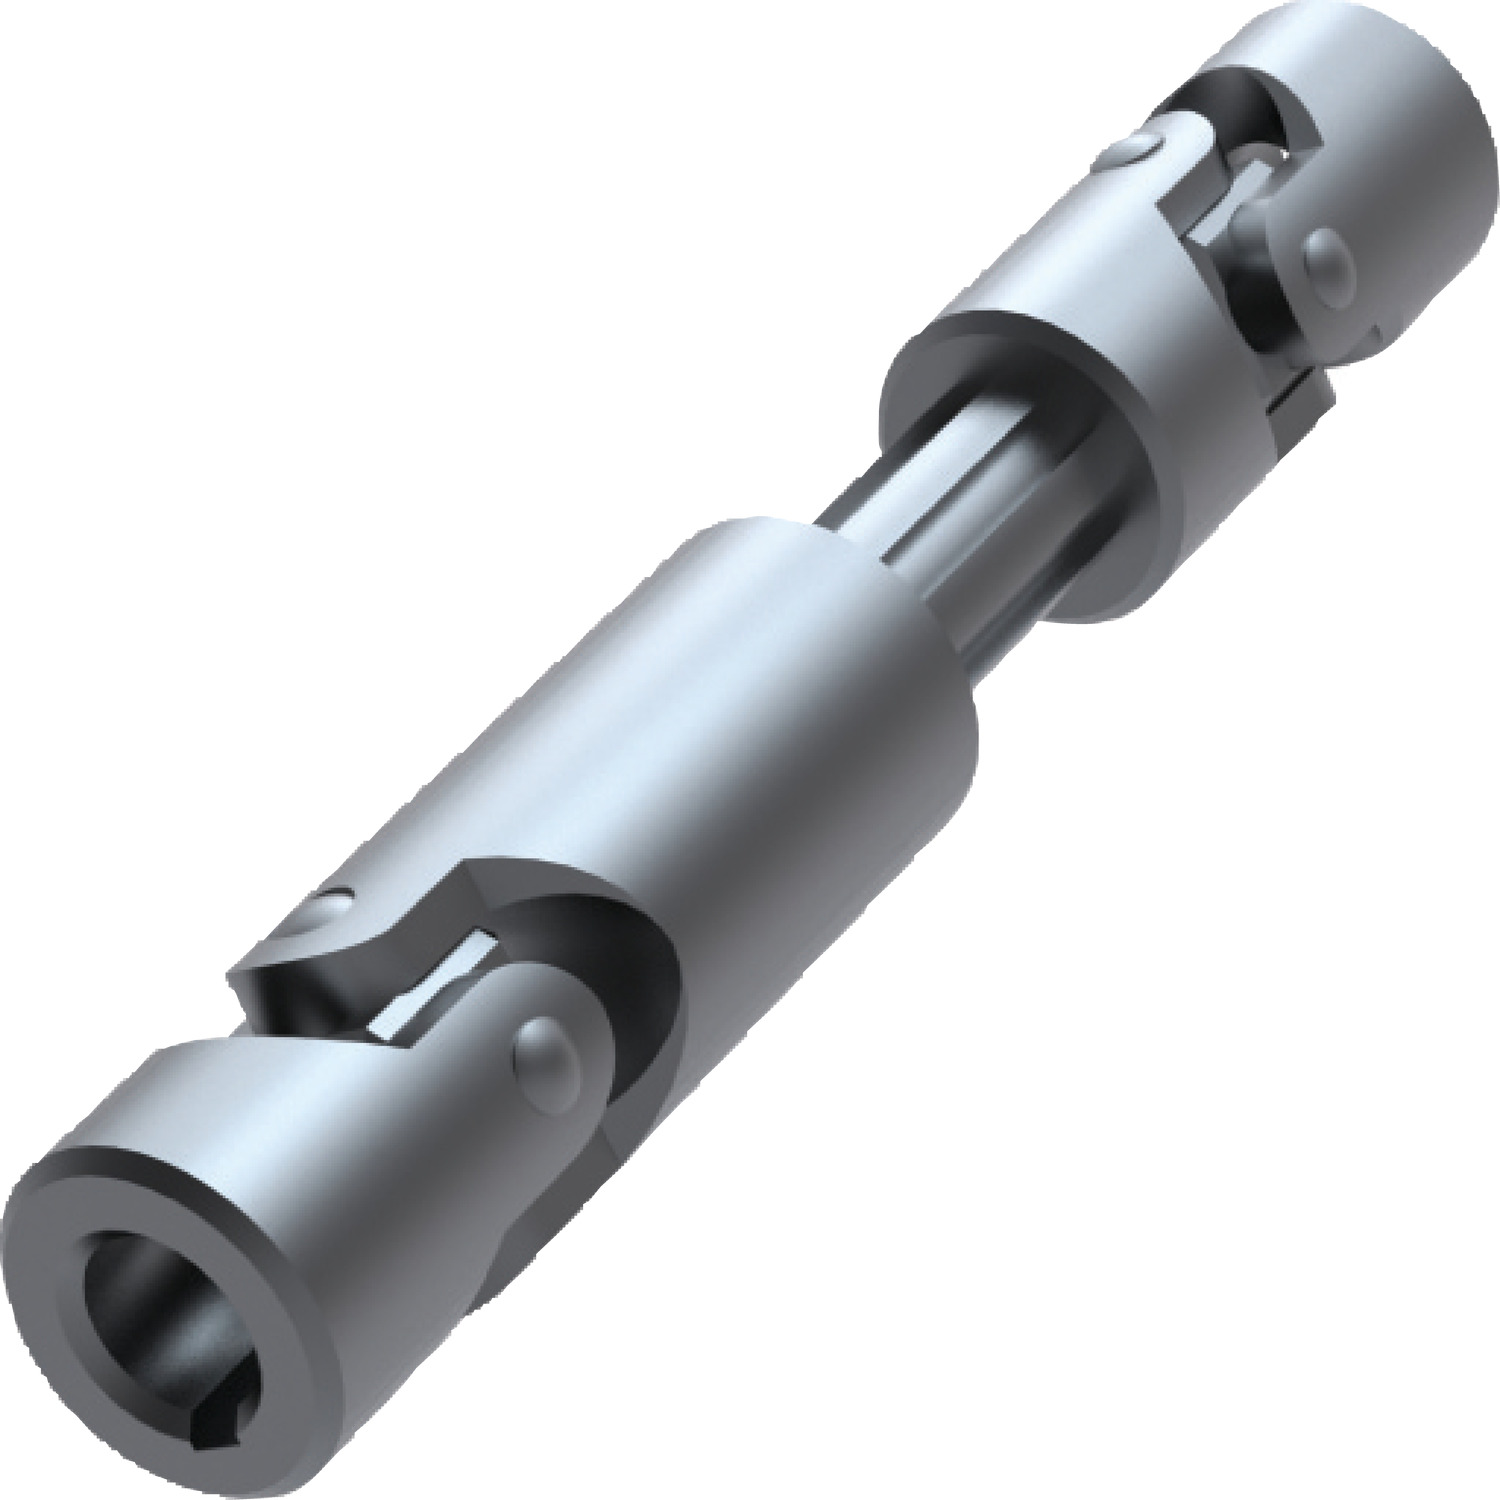 Stainless Telescopic Universal Joints Stainless steel telescopic universal joint used when two shafts that need connecting are too far apart for a standard universal joint is too small to reach.